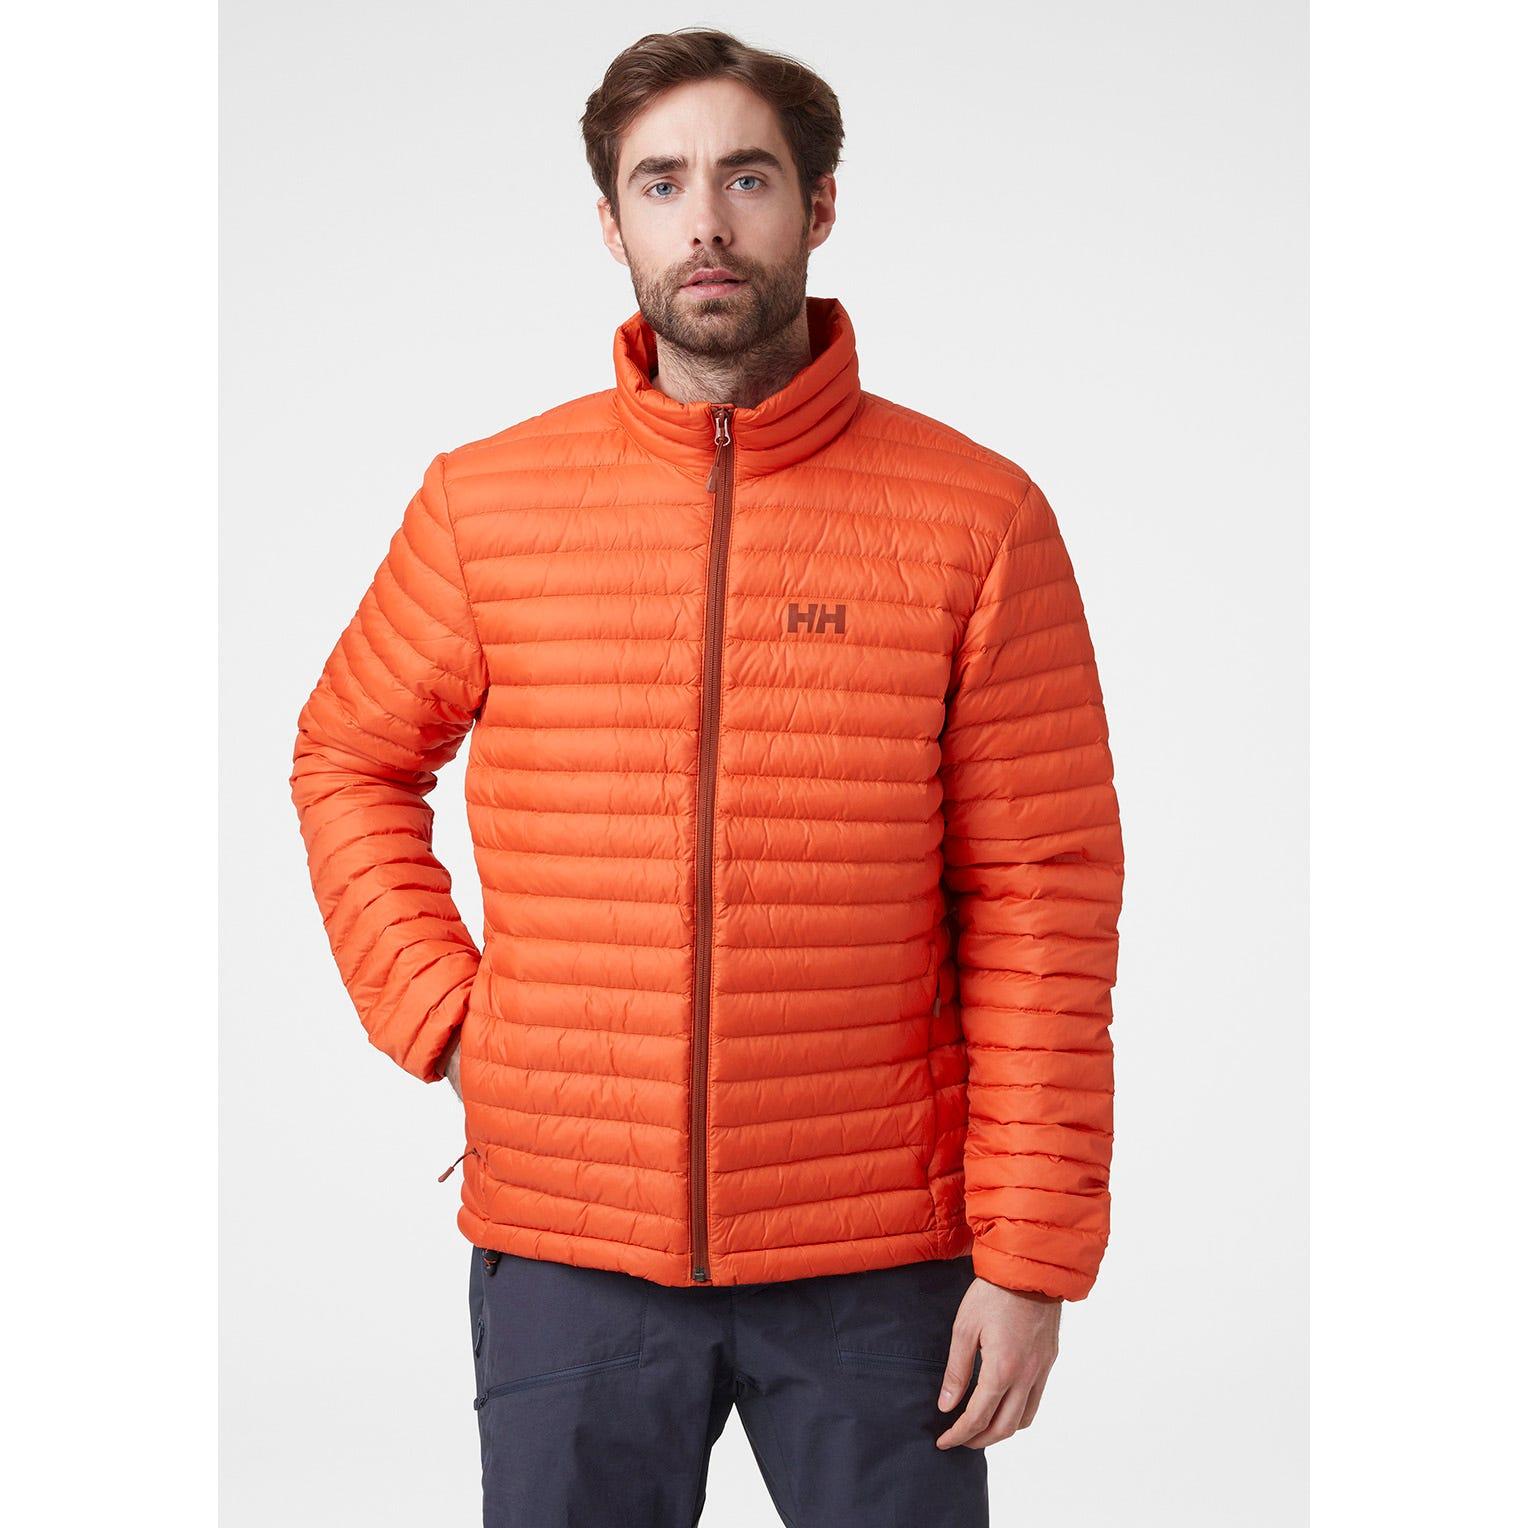 Helly Hansen Synthetic Sirdal Insulator Jacket in Red for Men - Lyst